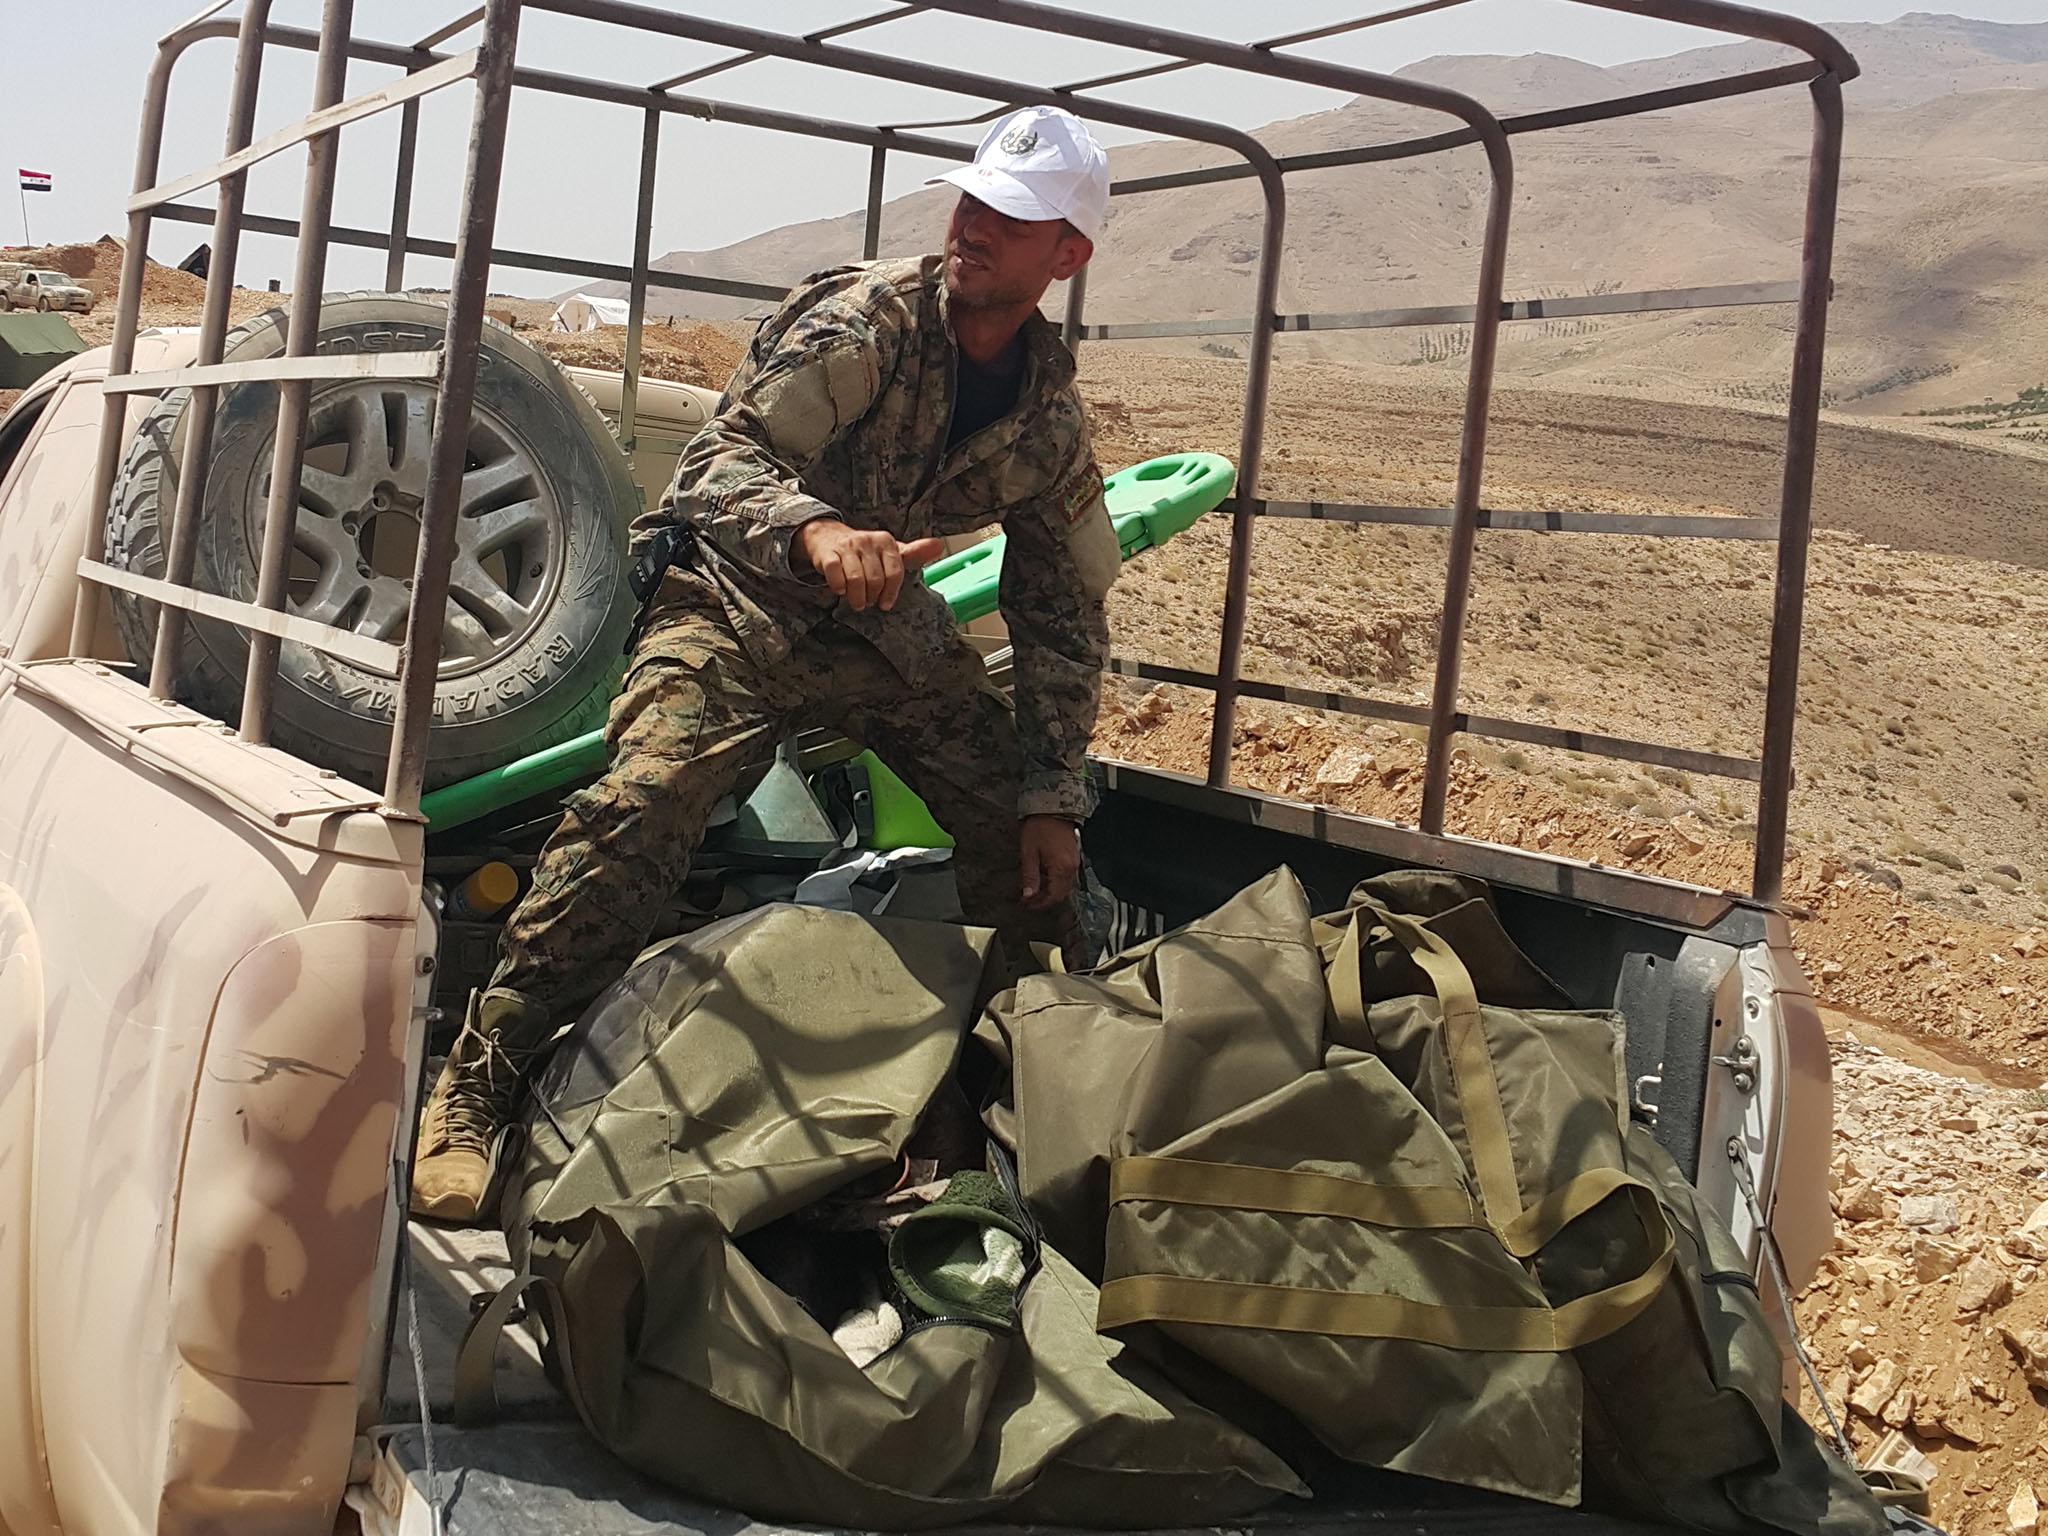 A Syrian officer identifies three dead Isis fighters in body bags at the captured Qalamoun fortress